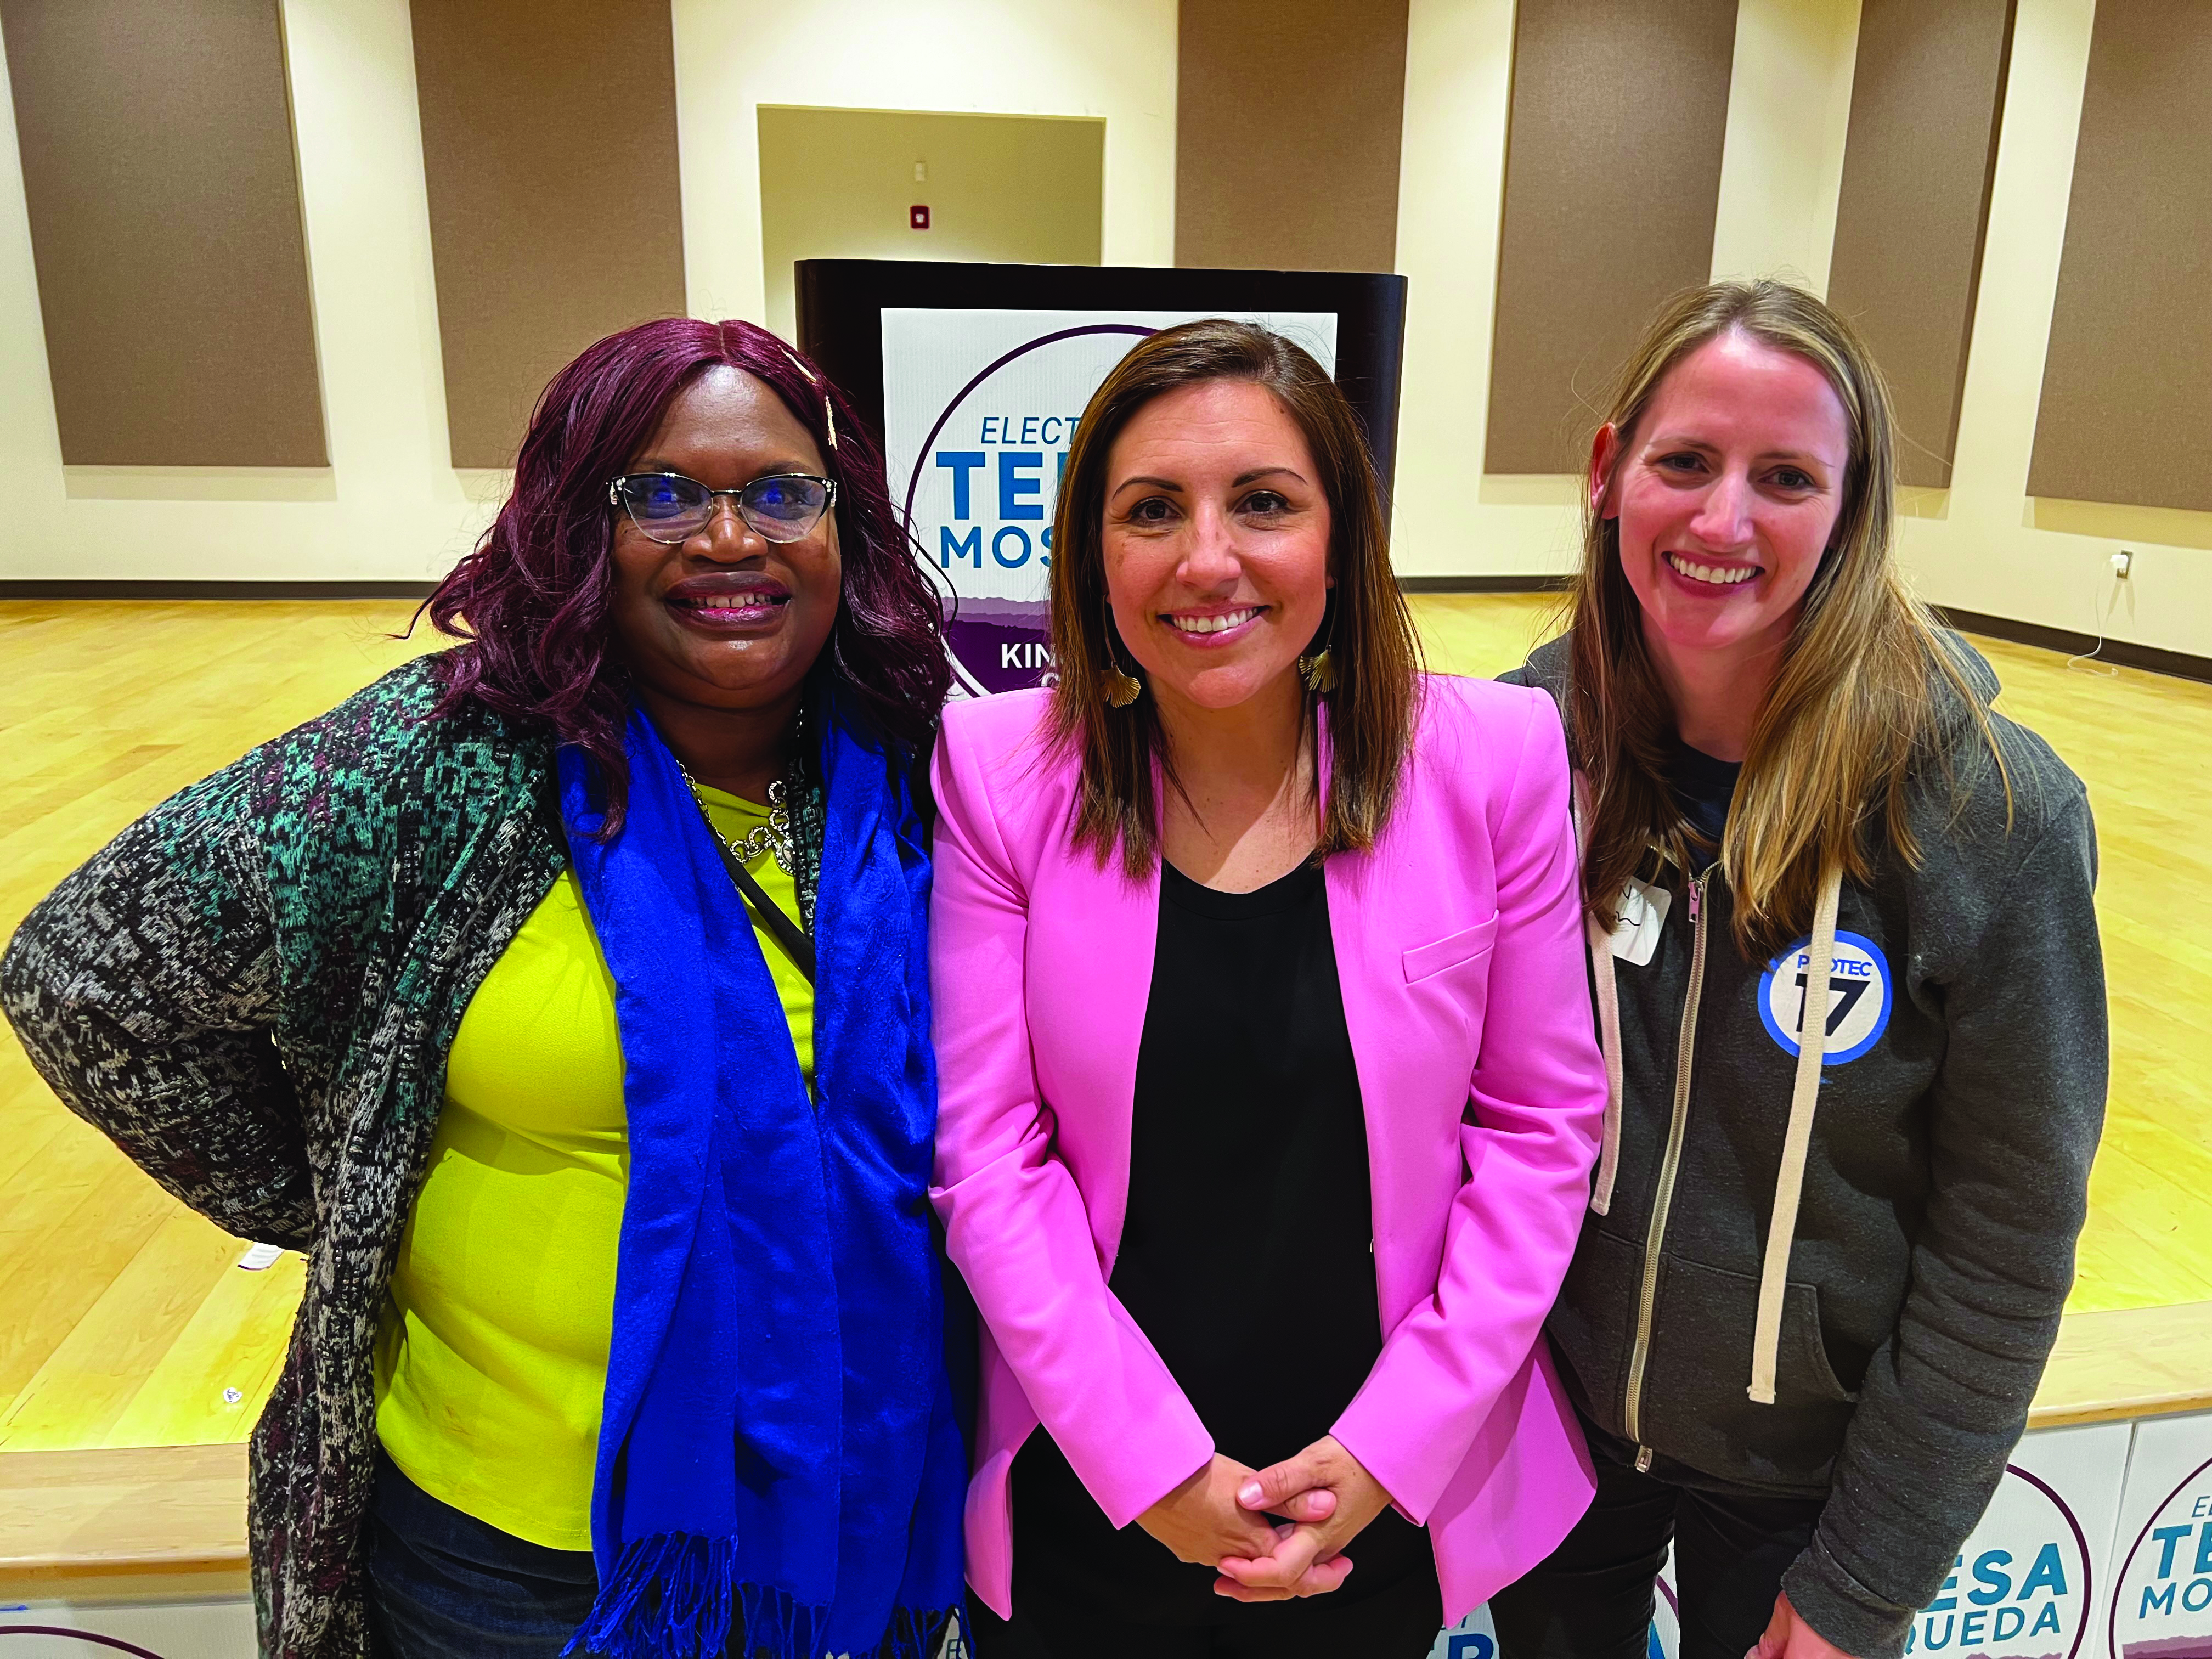 Picture of PROTEC17 Executive Board member Jennell Hicks with Councilmember Teresa Mosqueda and PROTEC17 Executive Director Karen Estevenin. They are smiling brightly together.